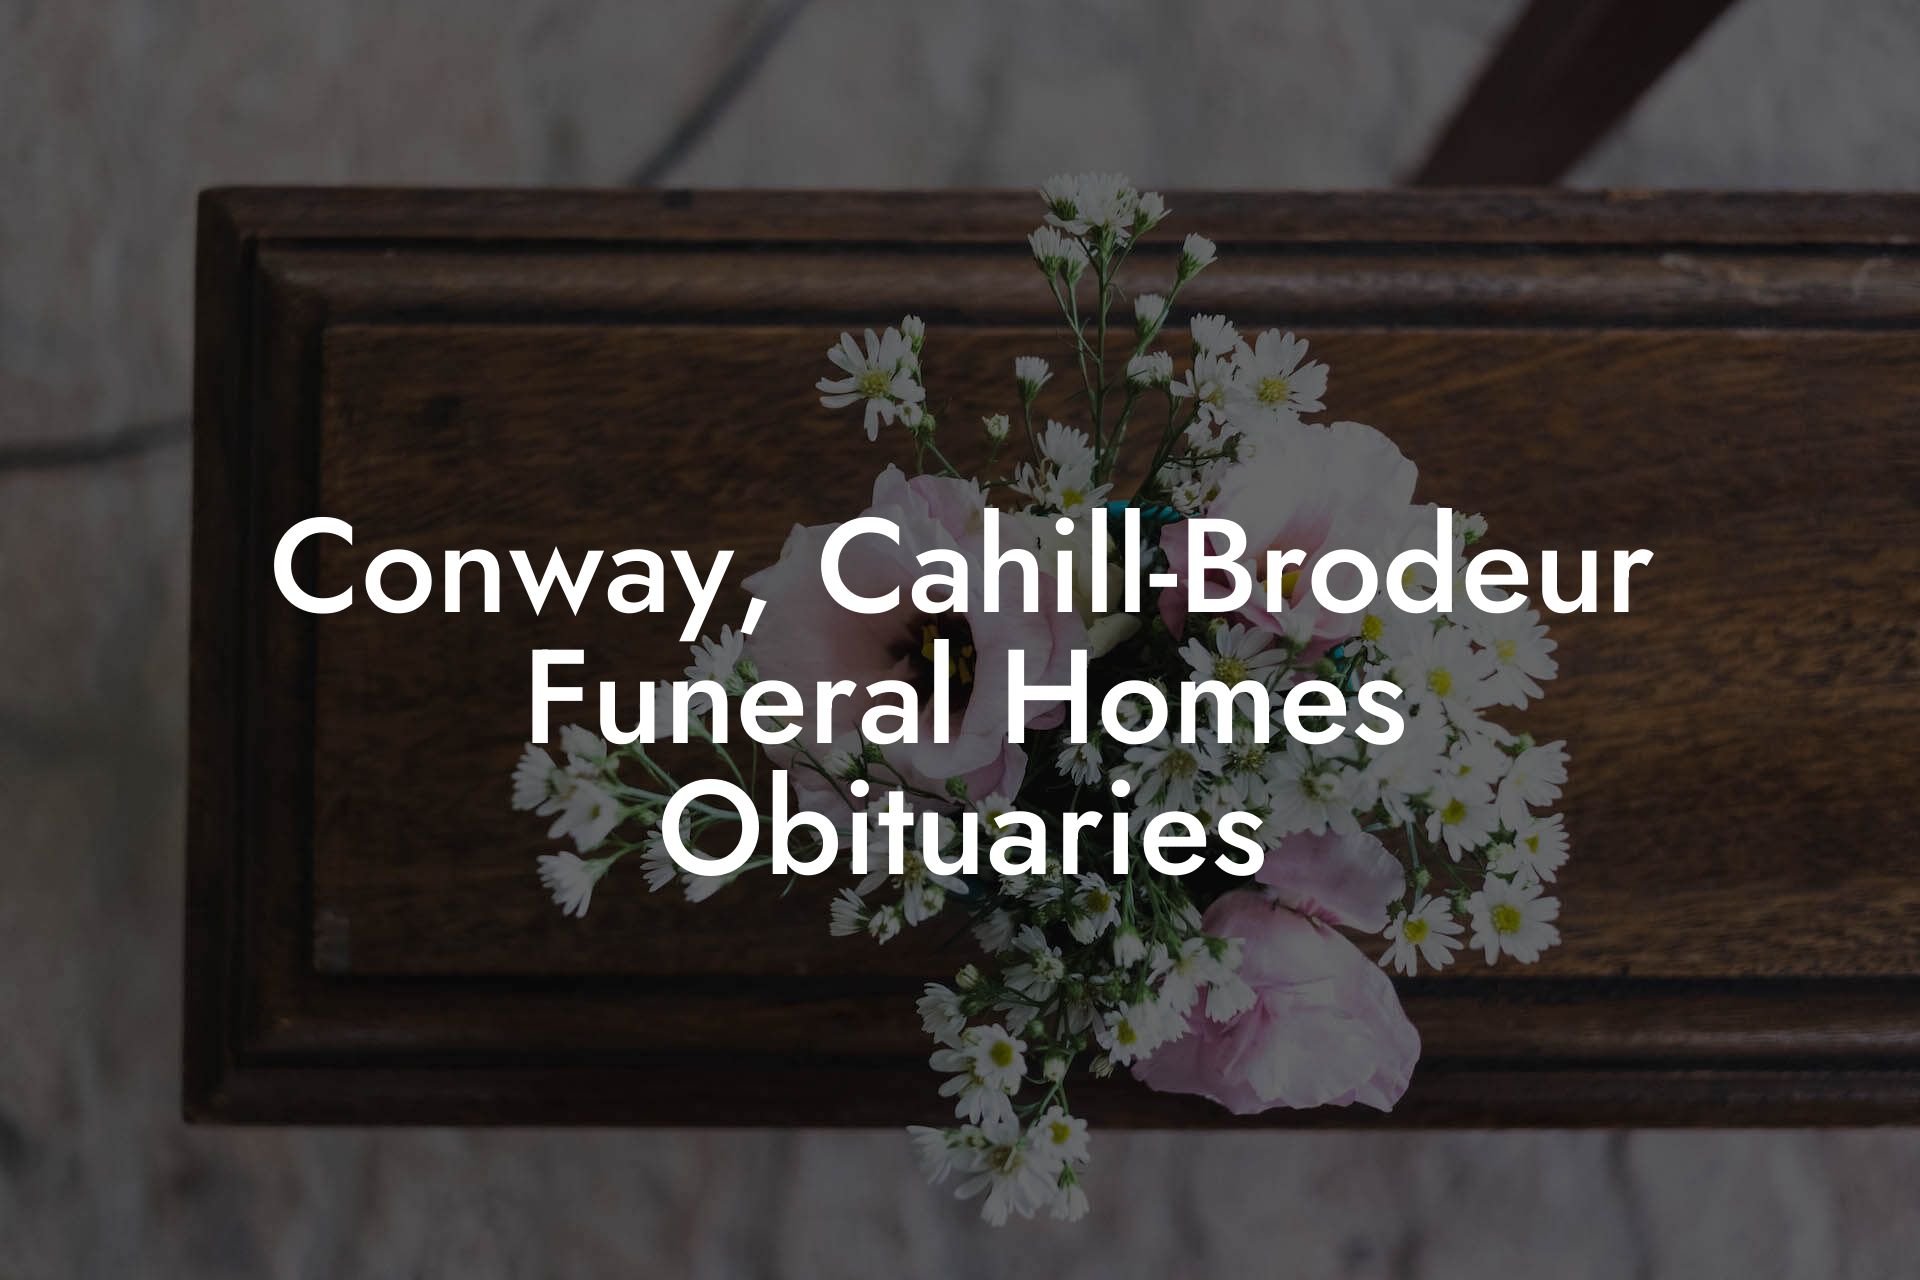 Conway, Cahill-Brodeur Funeral Homes Obituaries